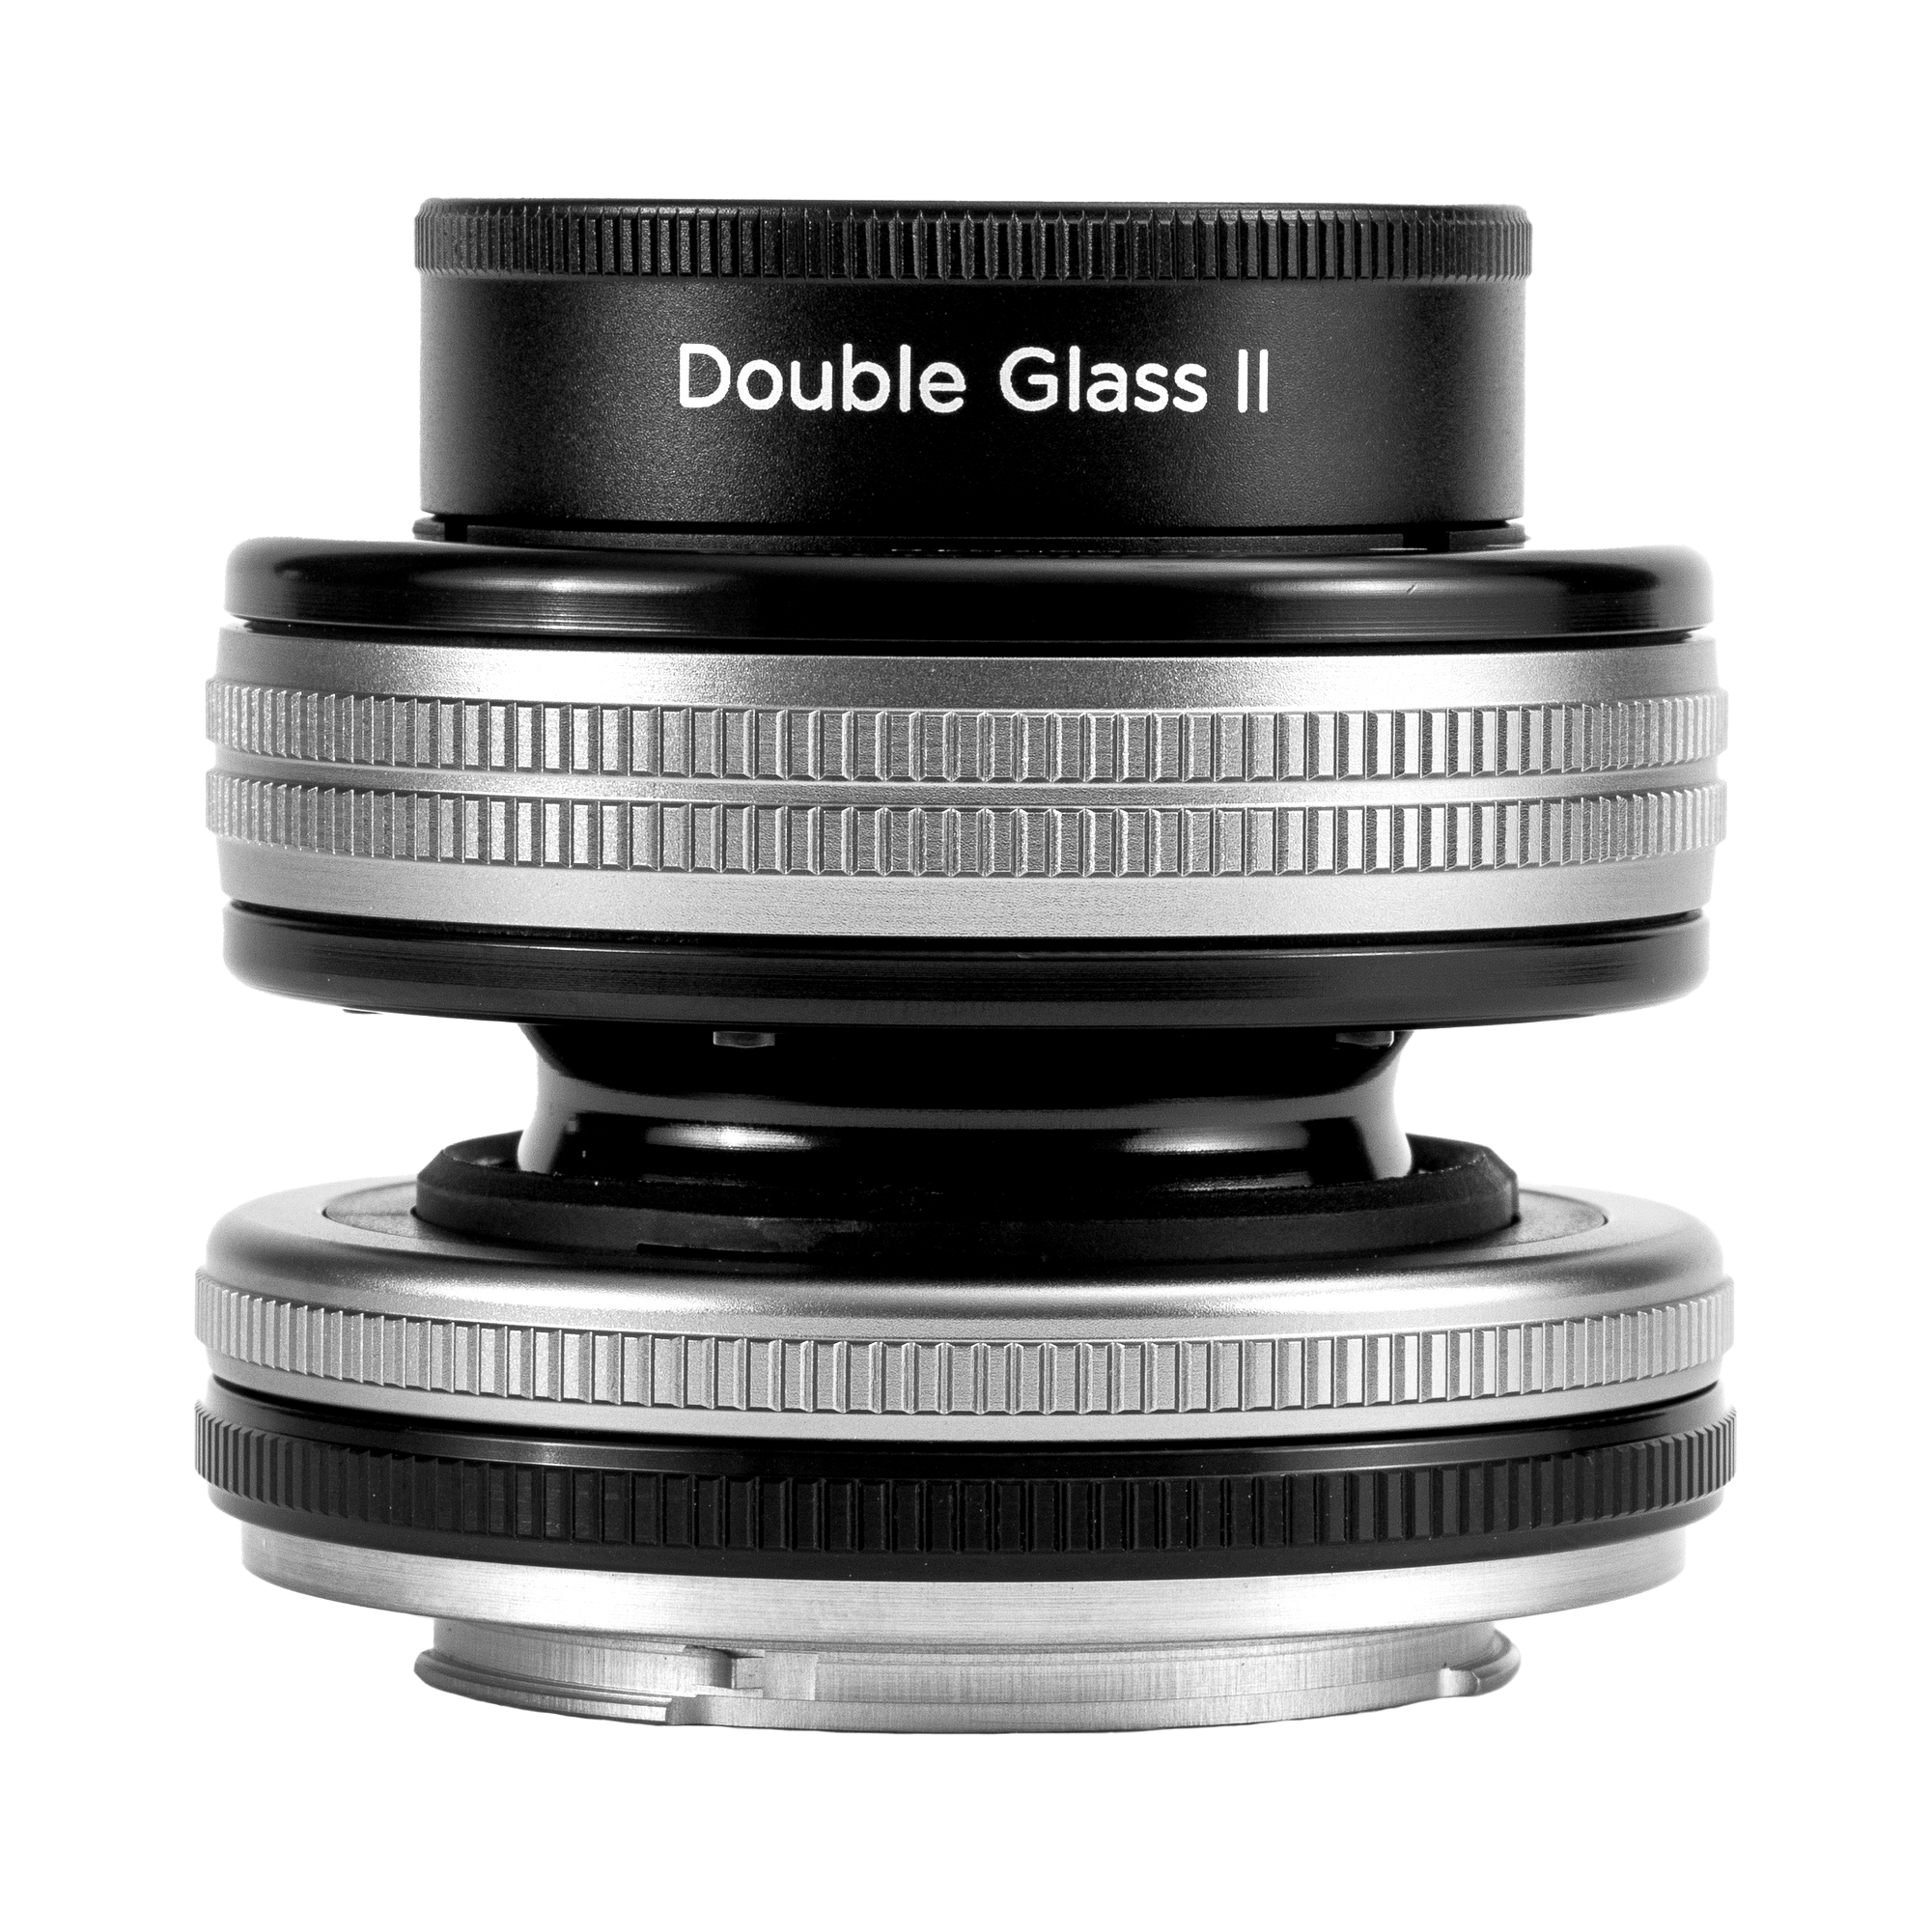 Composer Pro II + Double Glass II - Lensbaby Creative Effect Camera Lenses